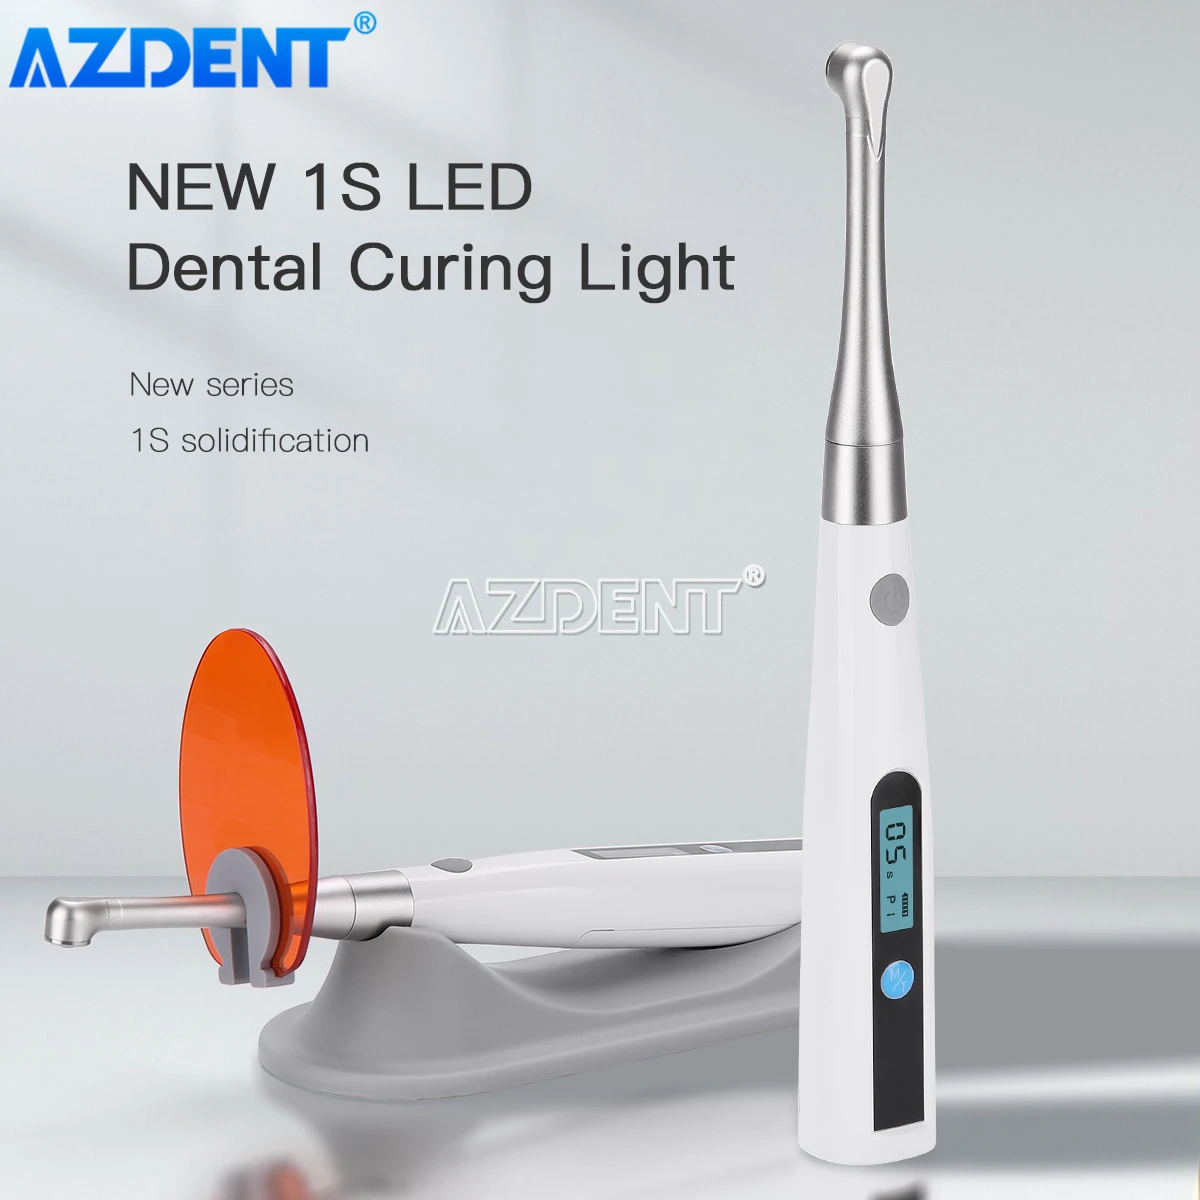 

AZDENT Dental LED Curing Light Lamp 1 Second Cure 2mm Resin 1200-1400mw/cm² Cordless Metal Head 3 Models Adjustable